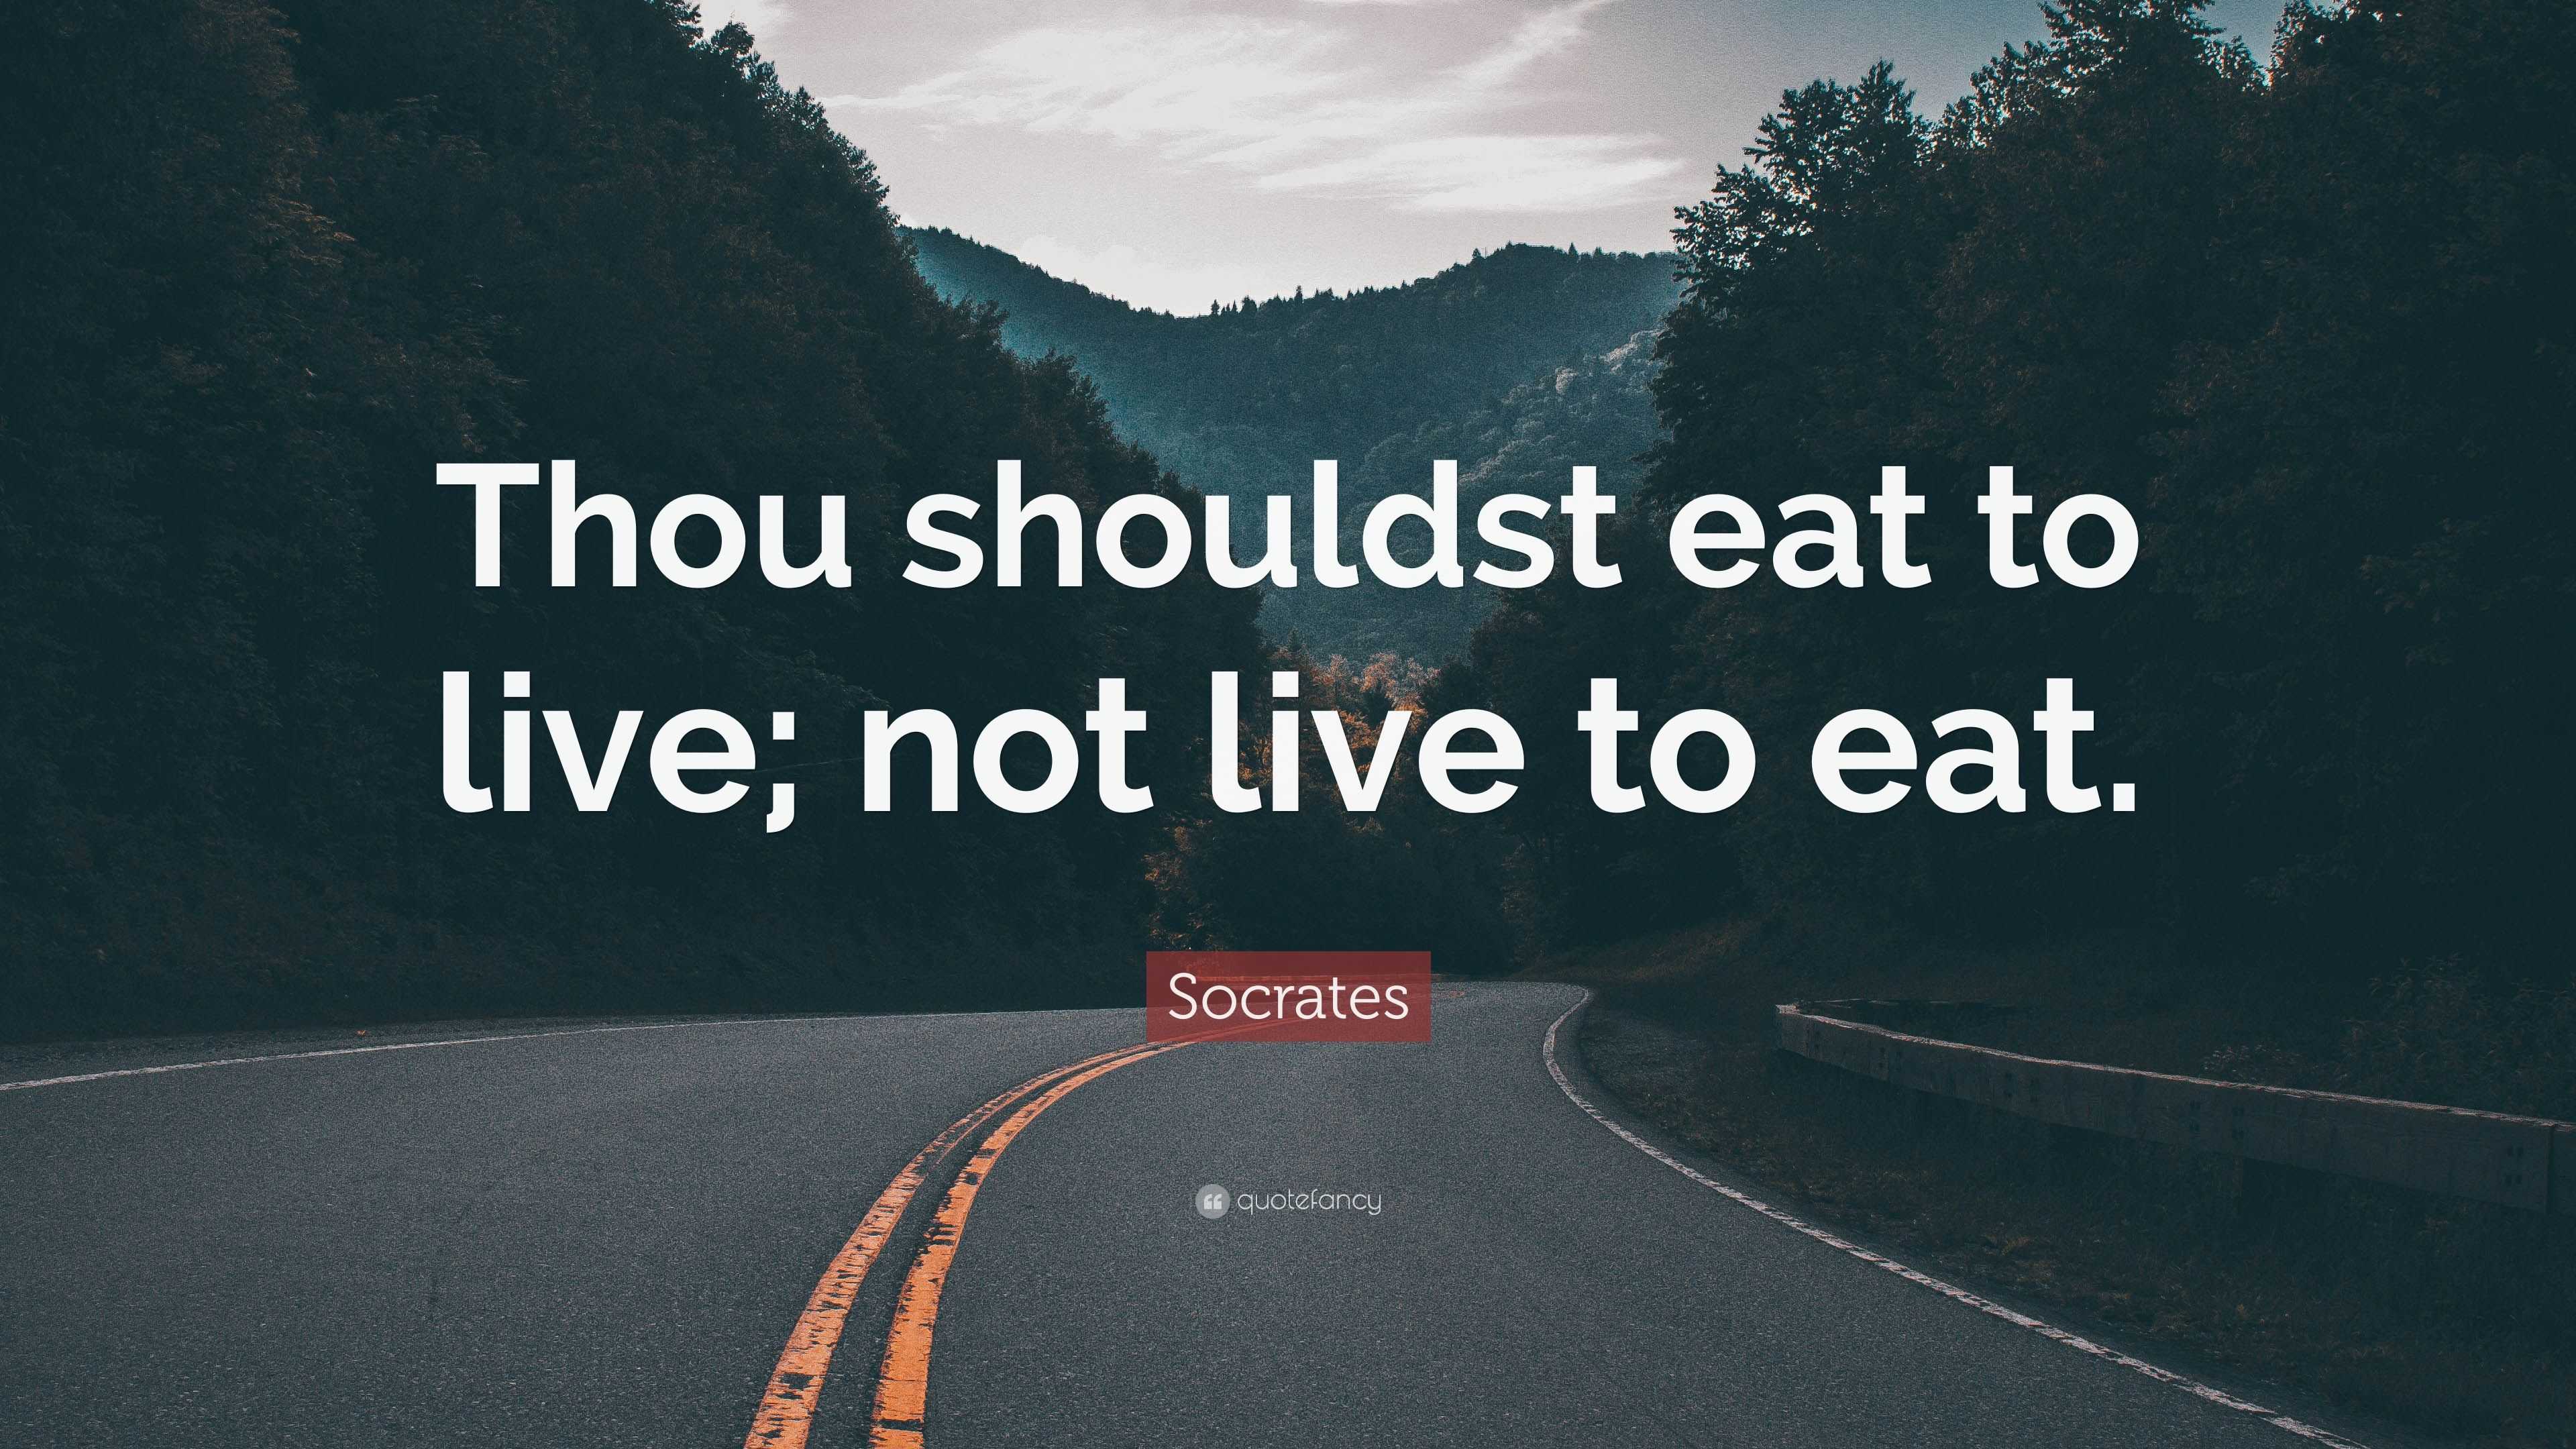 Socrates Quote: "Thou shouldst eat to live; not live to eat." (11 wallpapers) - Quotefancy